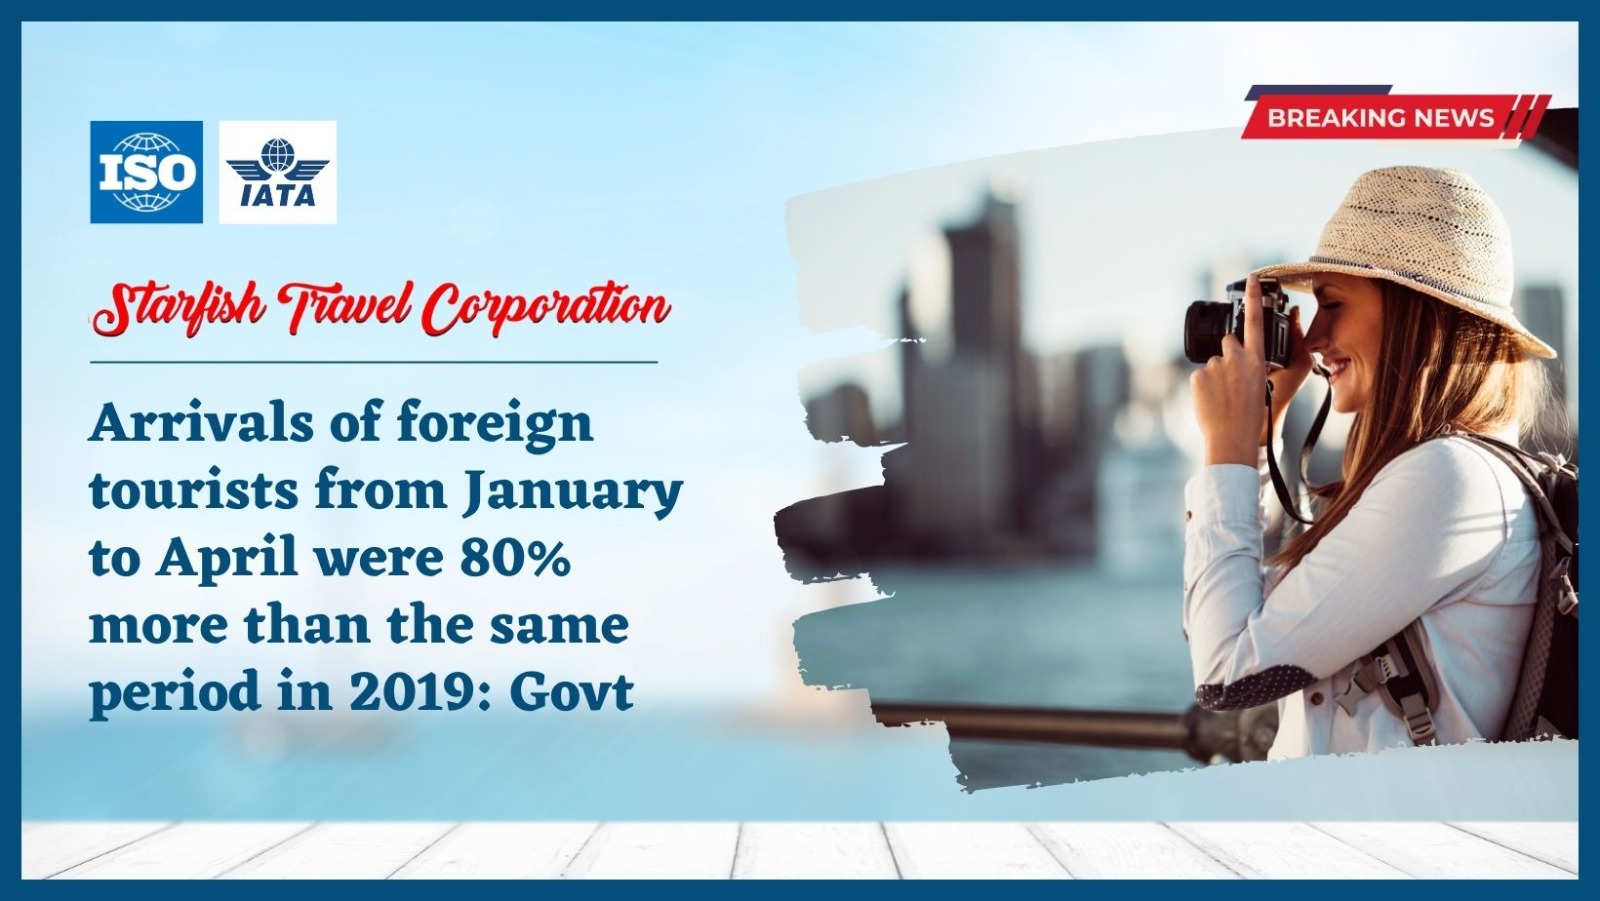 You are currently viewing Arrivals of foreign tourists from January to April were 80% more than the same period in 2019: Govt